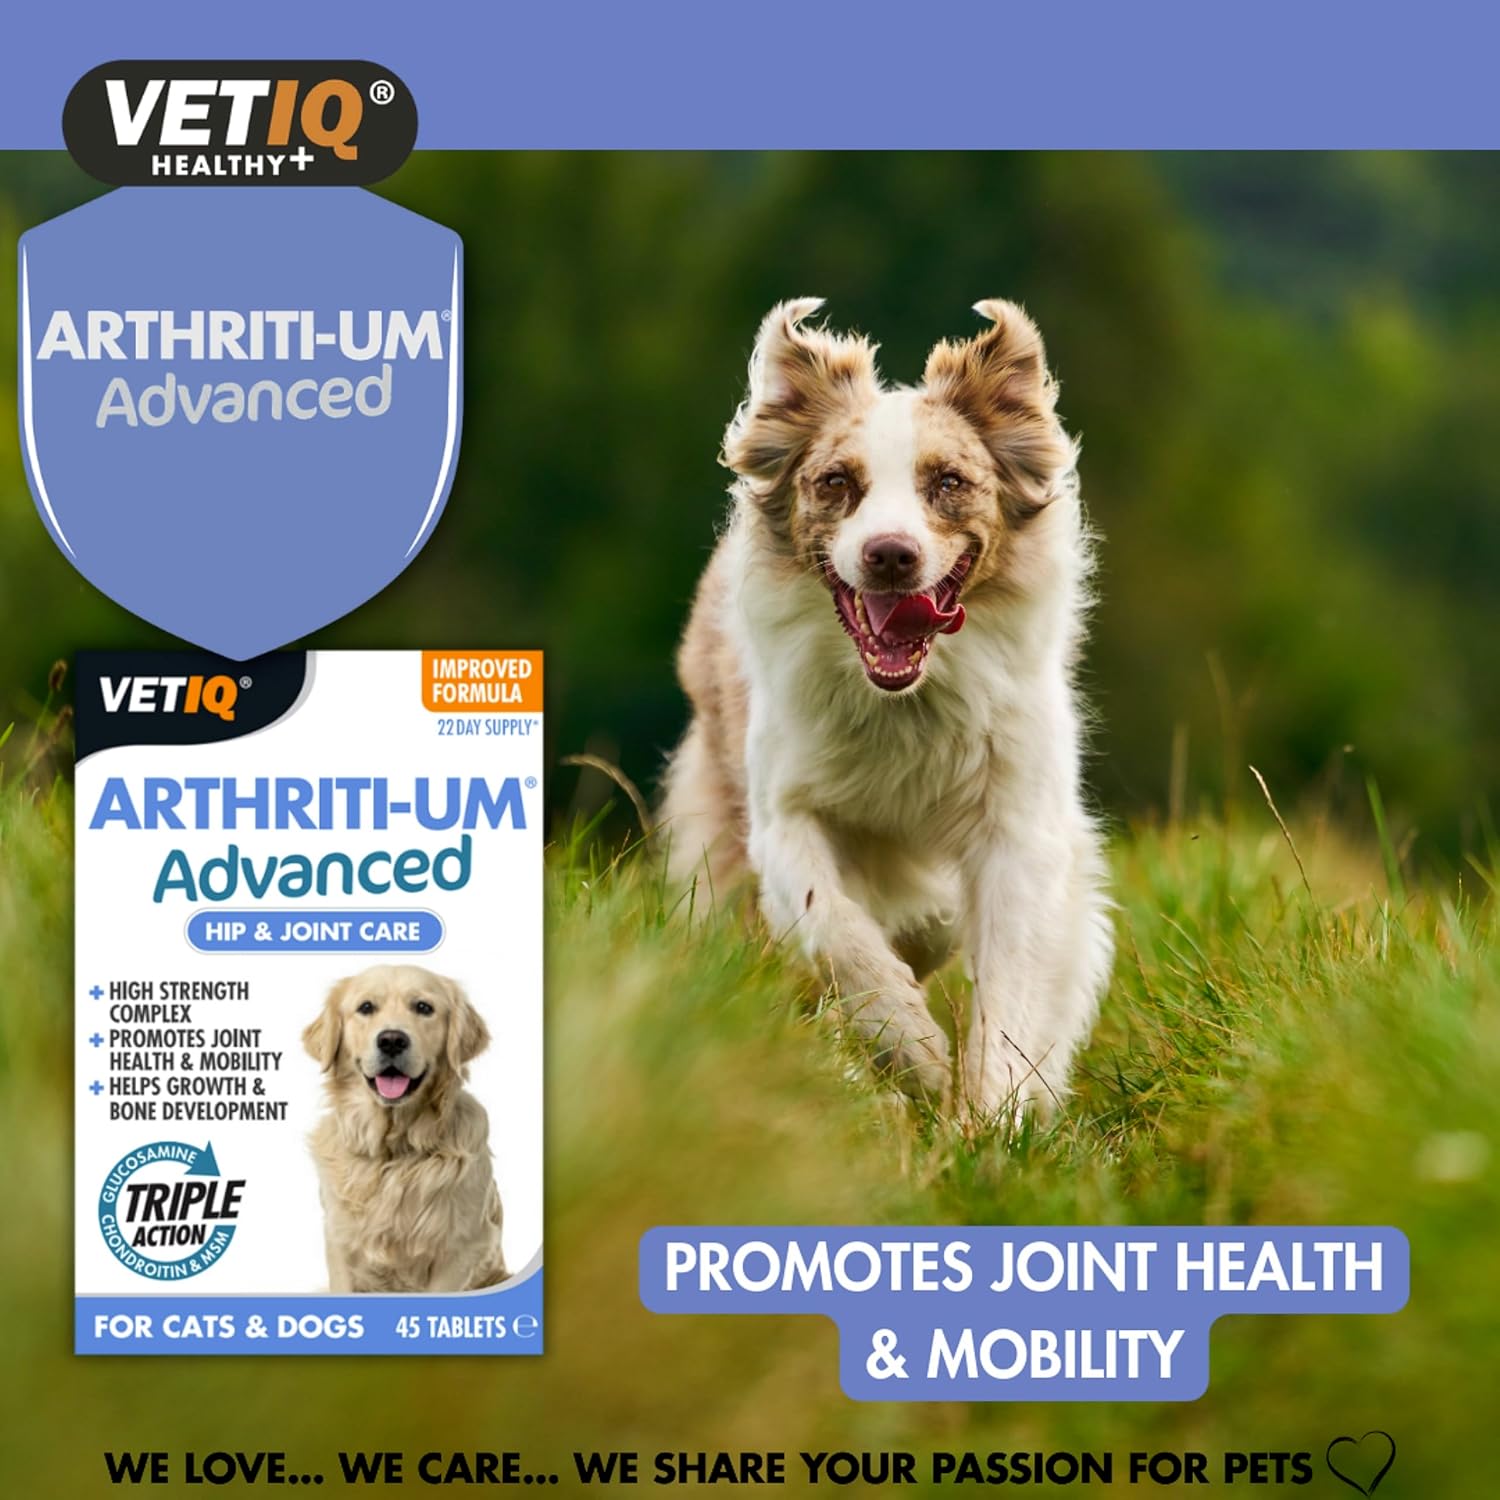 VetIQ Arthriti-Um Advanced Hip & Joint Care, 45 Tablets, Dog & Cat Supplements, Dog Vitamins Promote Joint Health & Mobility with Glucosamine and Chondroitin Helps Pain Relief For Dogs :Pet Supplies